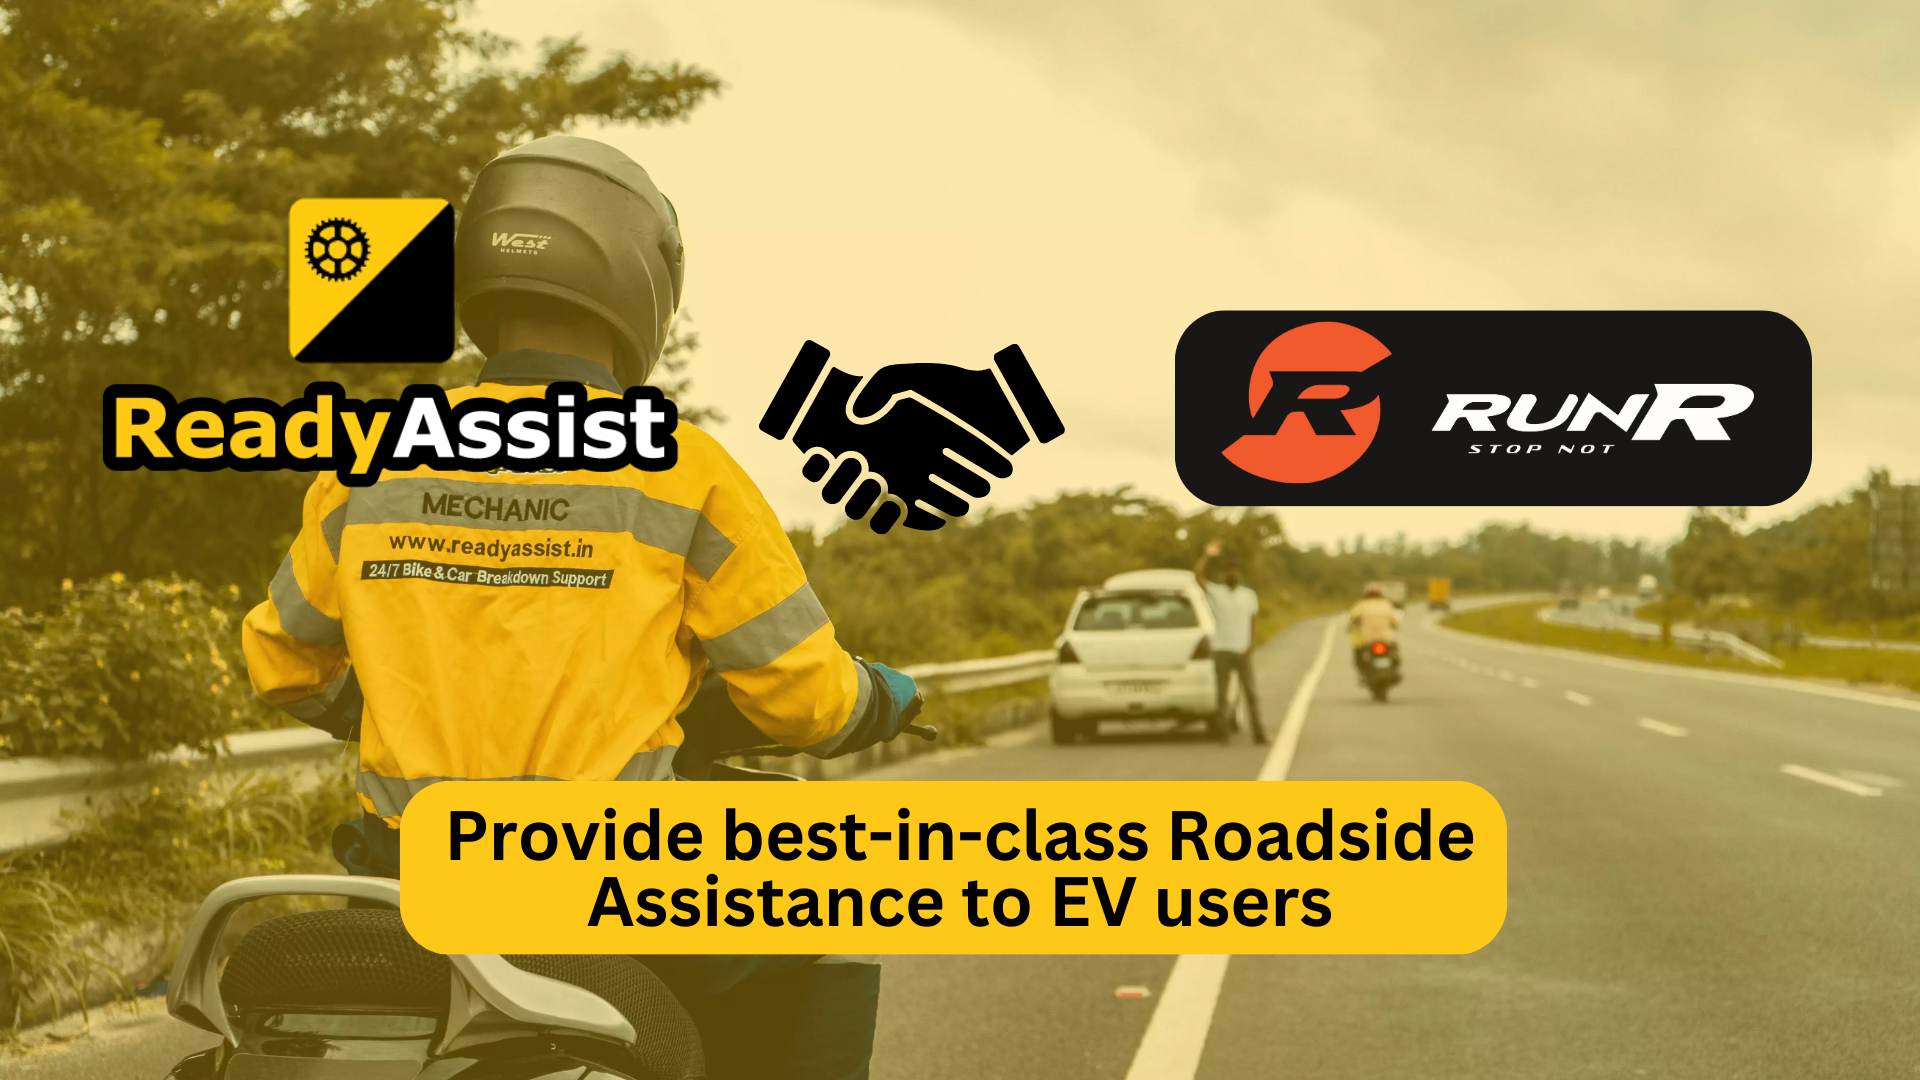 https://e-vehicleinfo.com/runr-mobility-partners-readyassist-to-provide-roadside-assistance-to-ev-users/